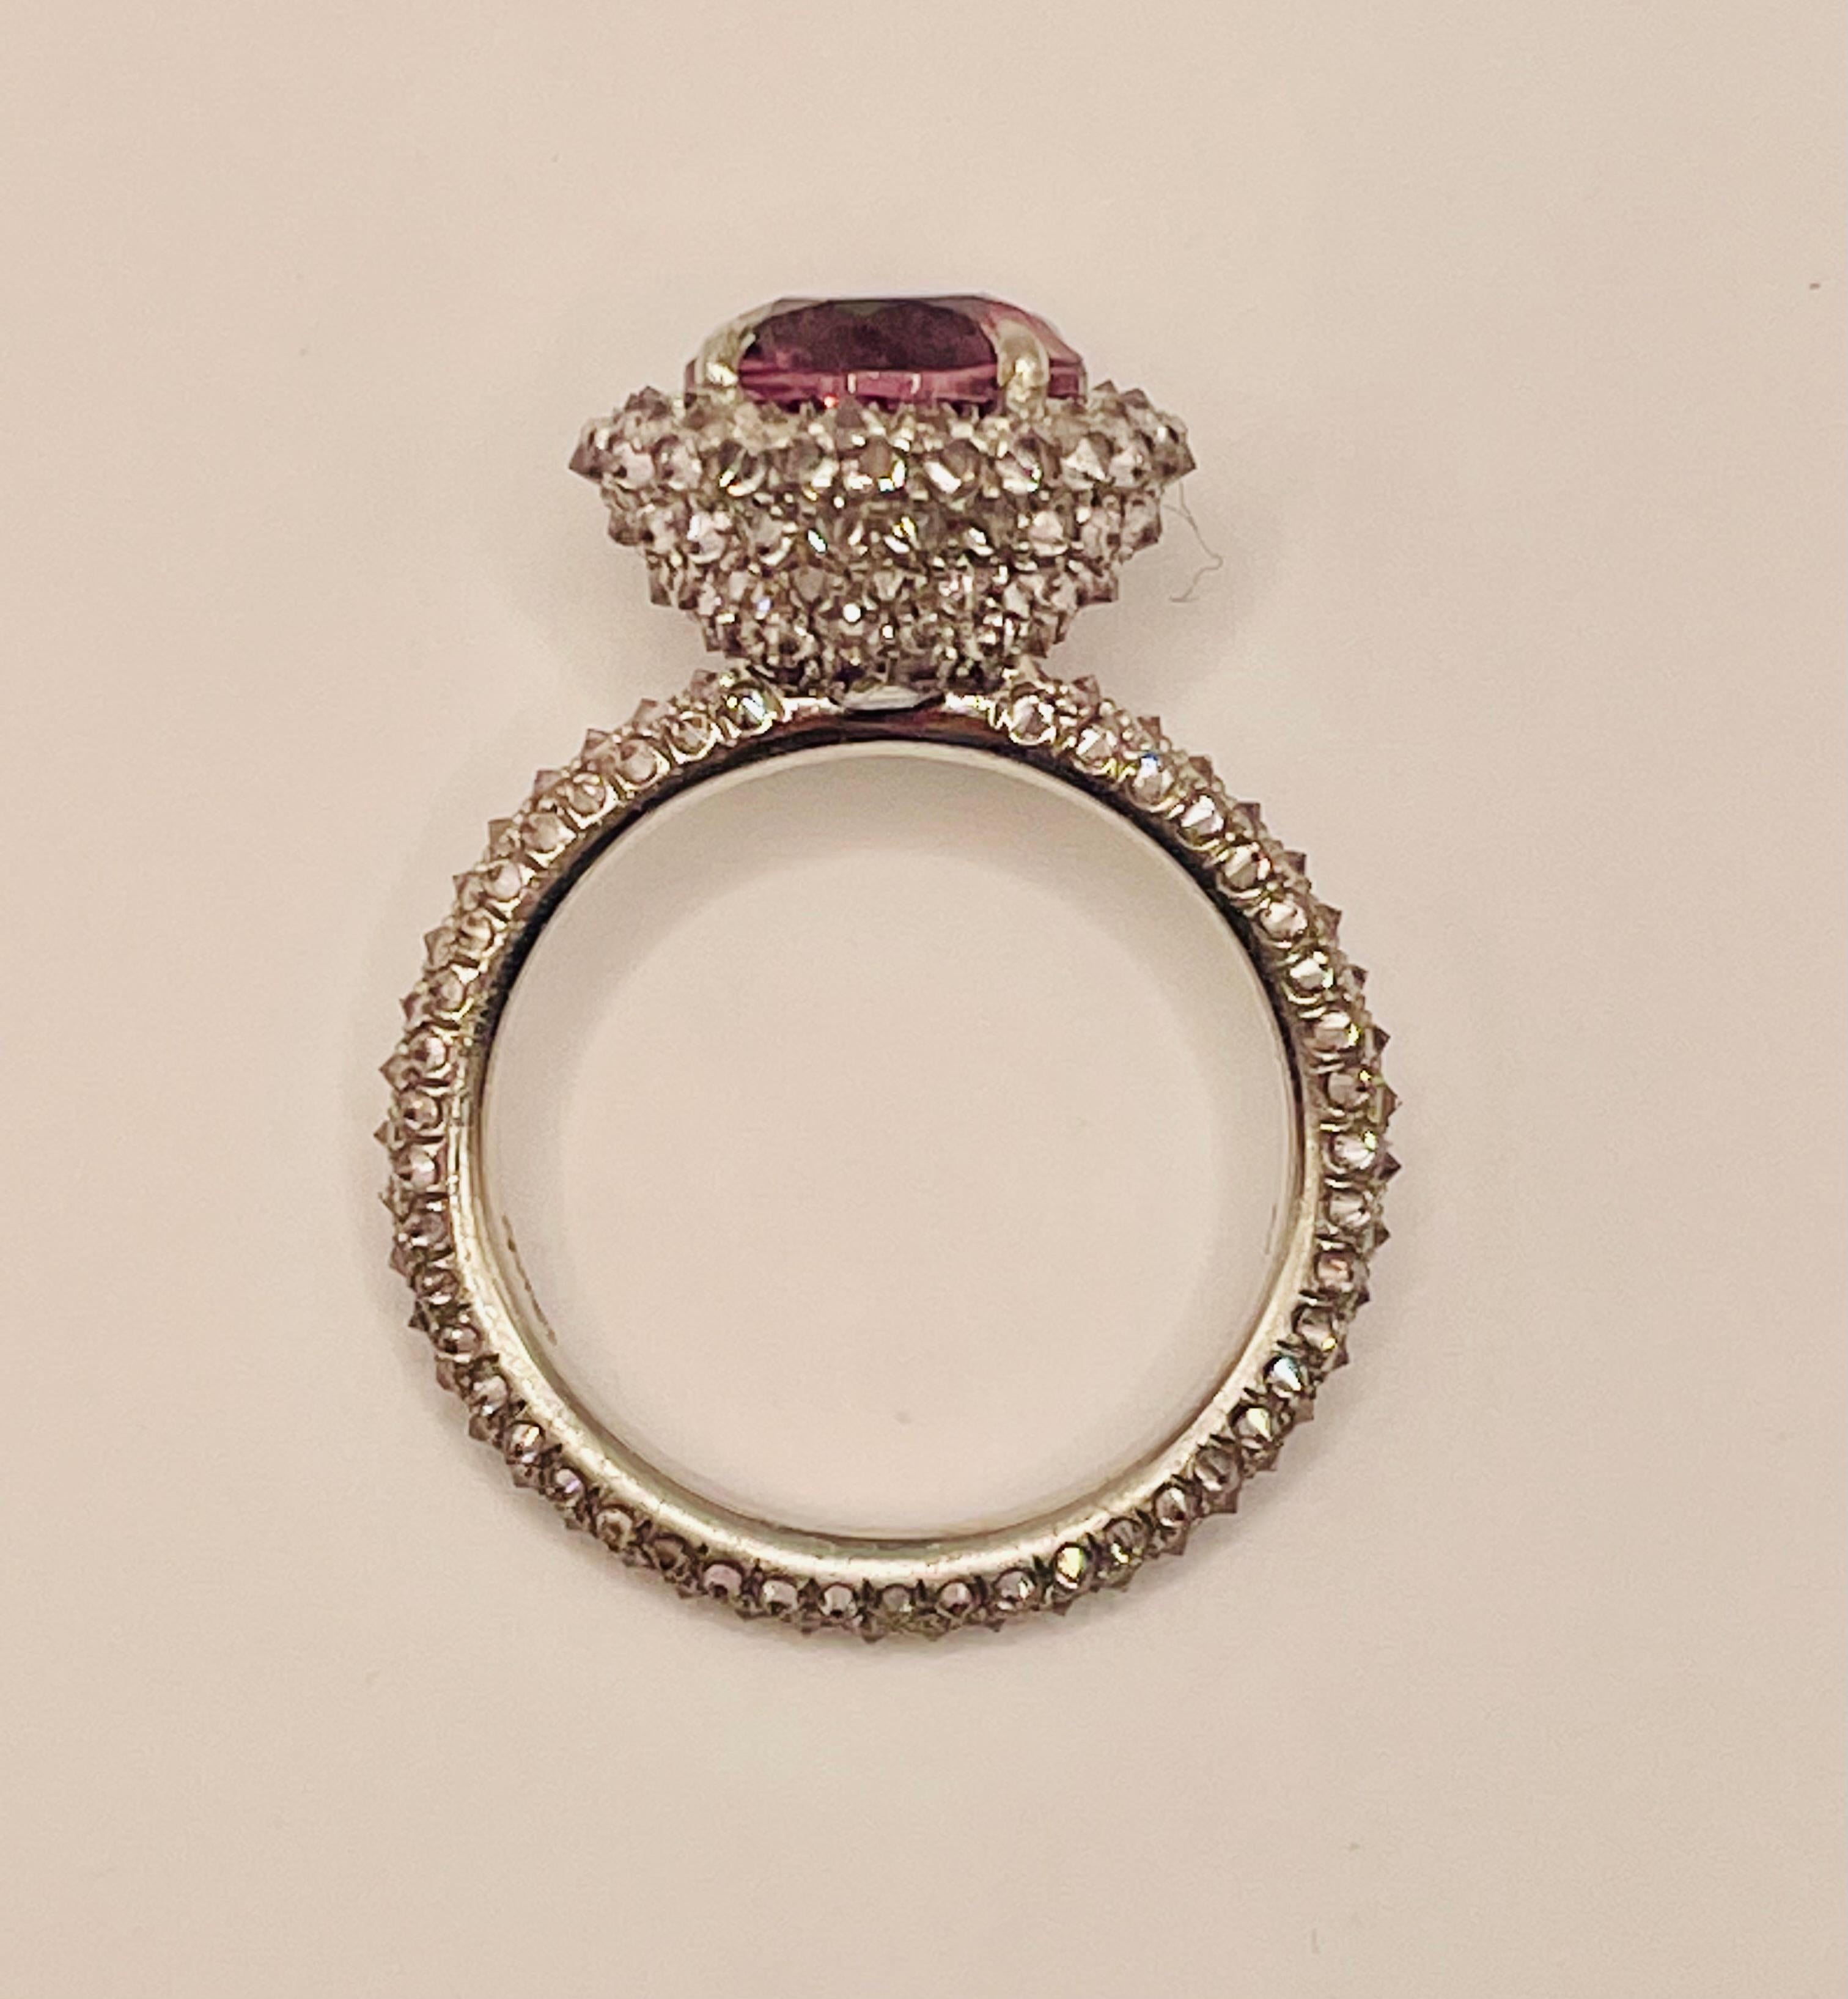 Round Cut Reverse-Set Pink Diamonds and Pink Tourmaline Engagemant Ring by Julia Shlovsky For Sale